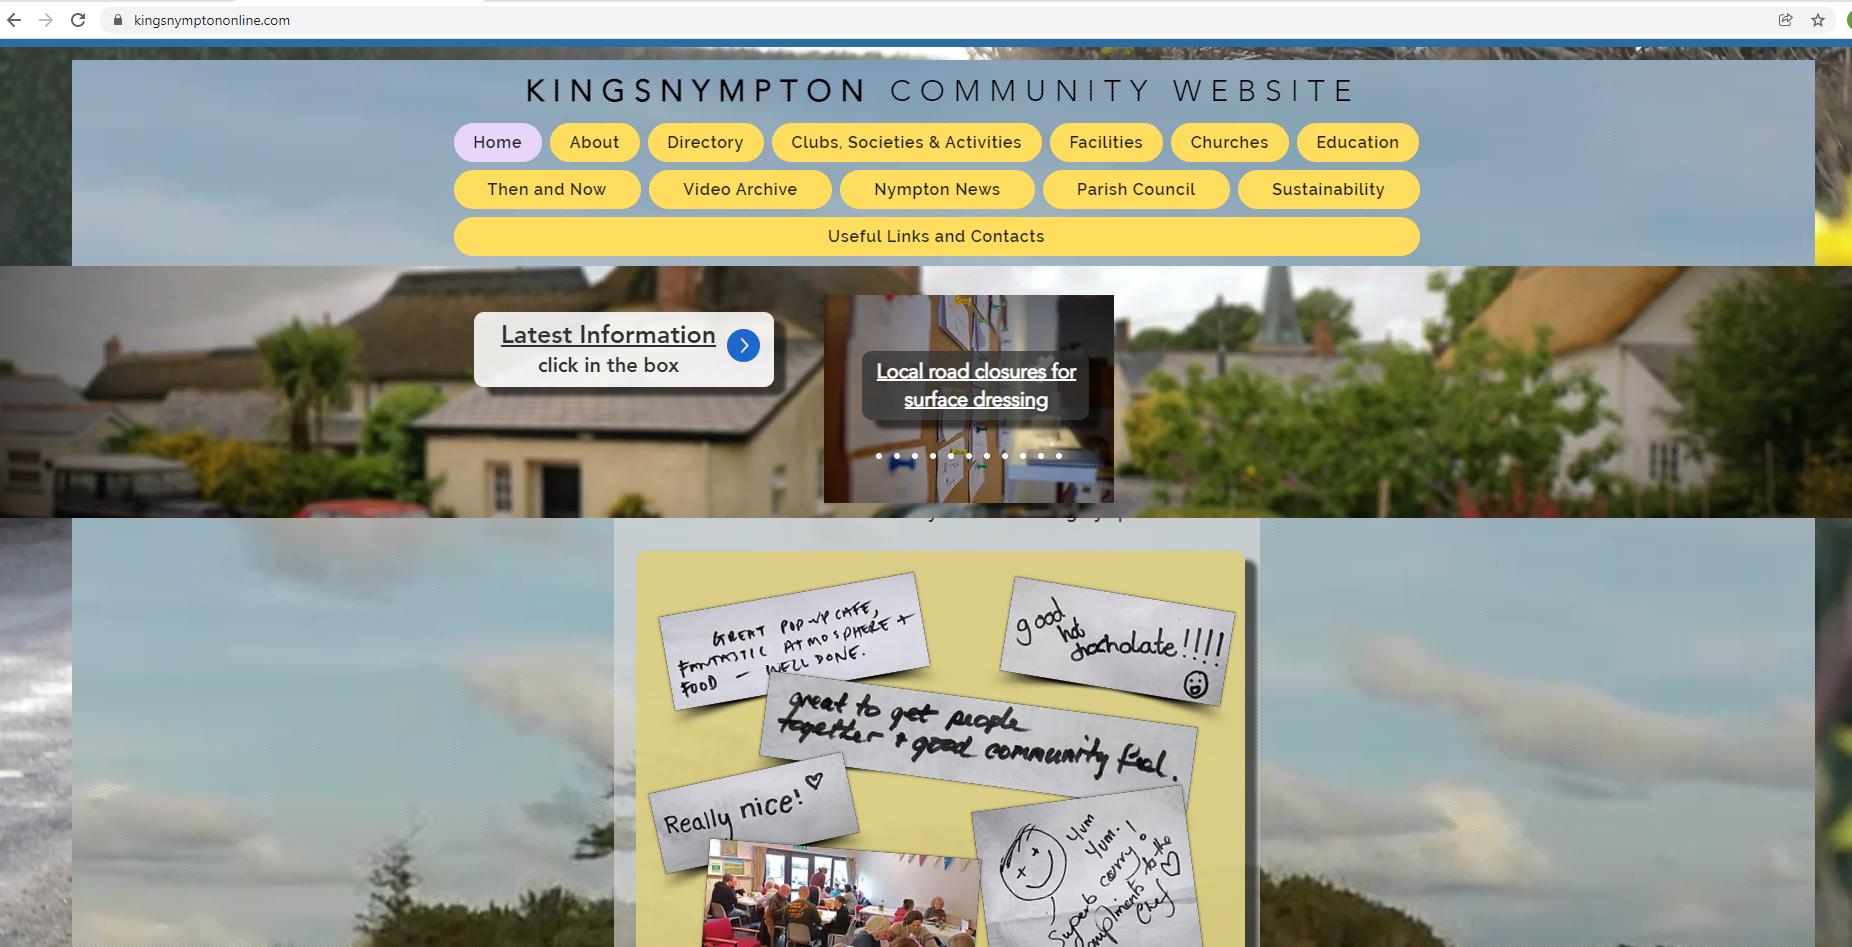 A picture of Kings Nympton village website